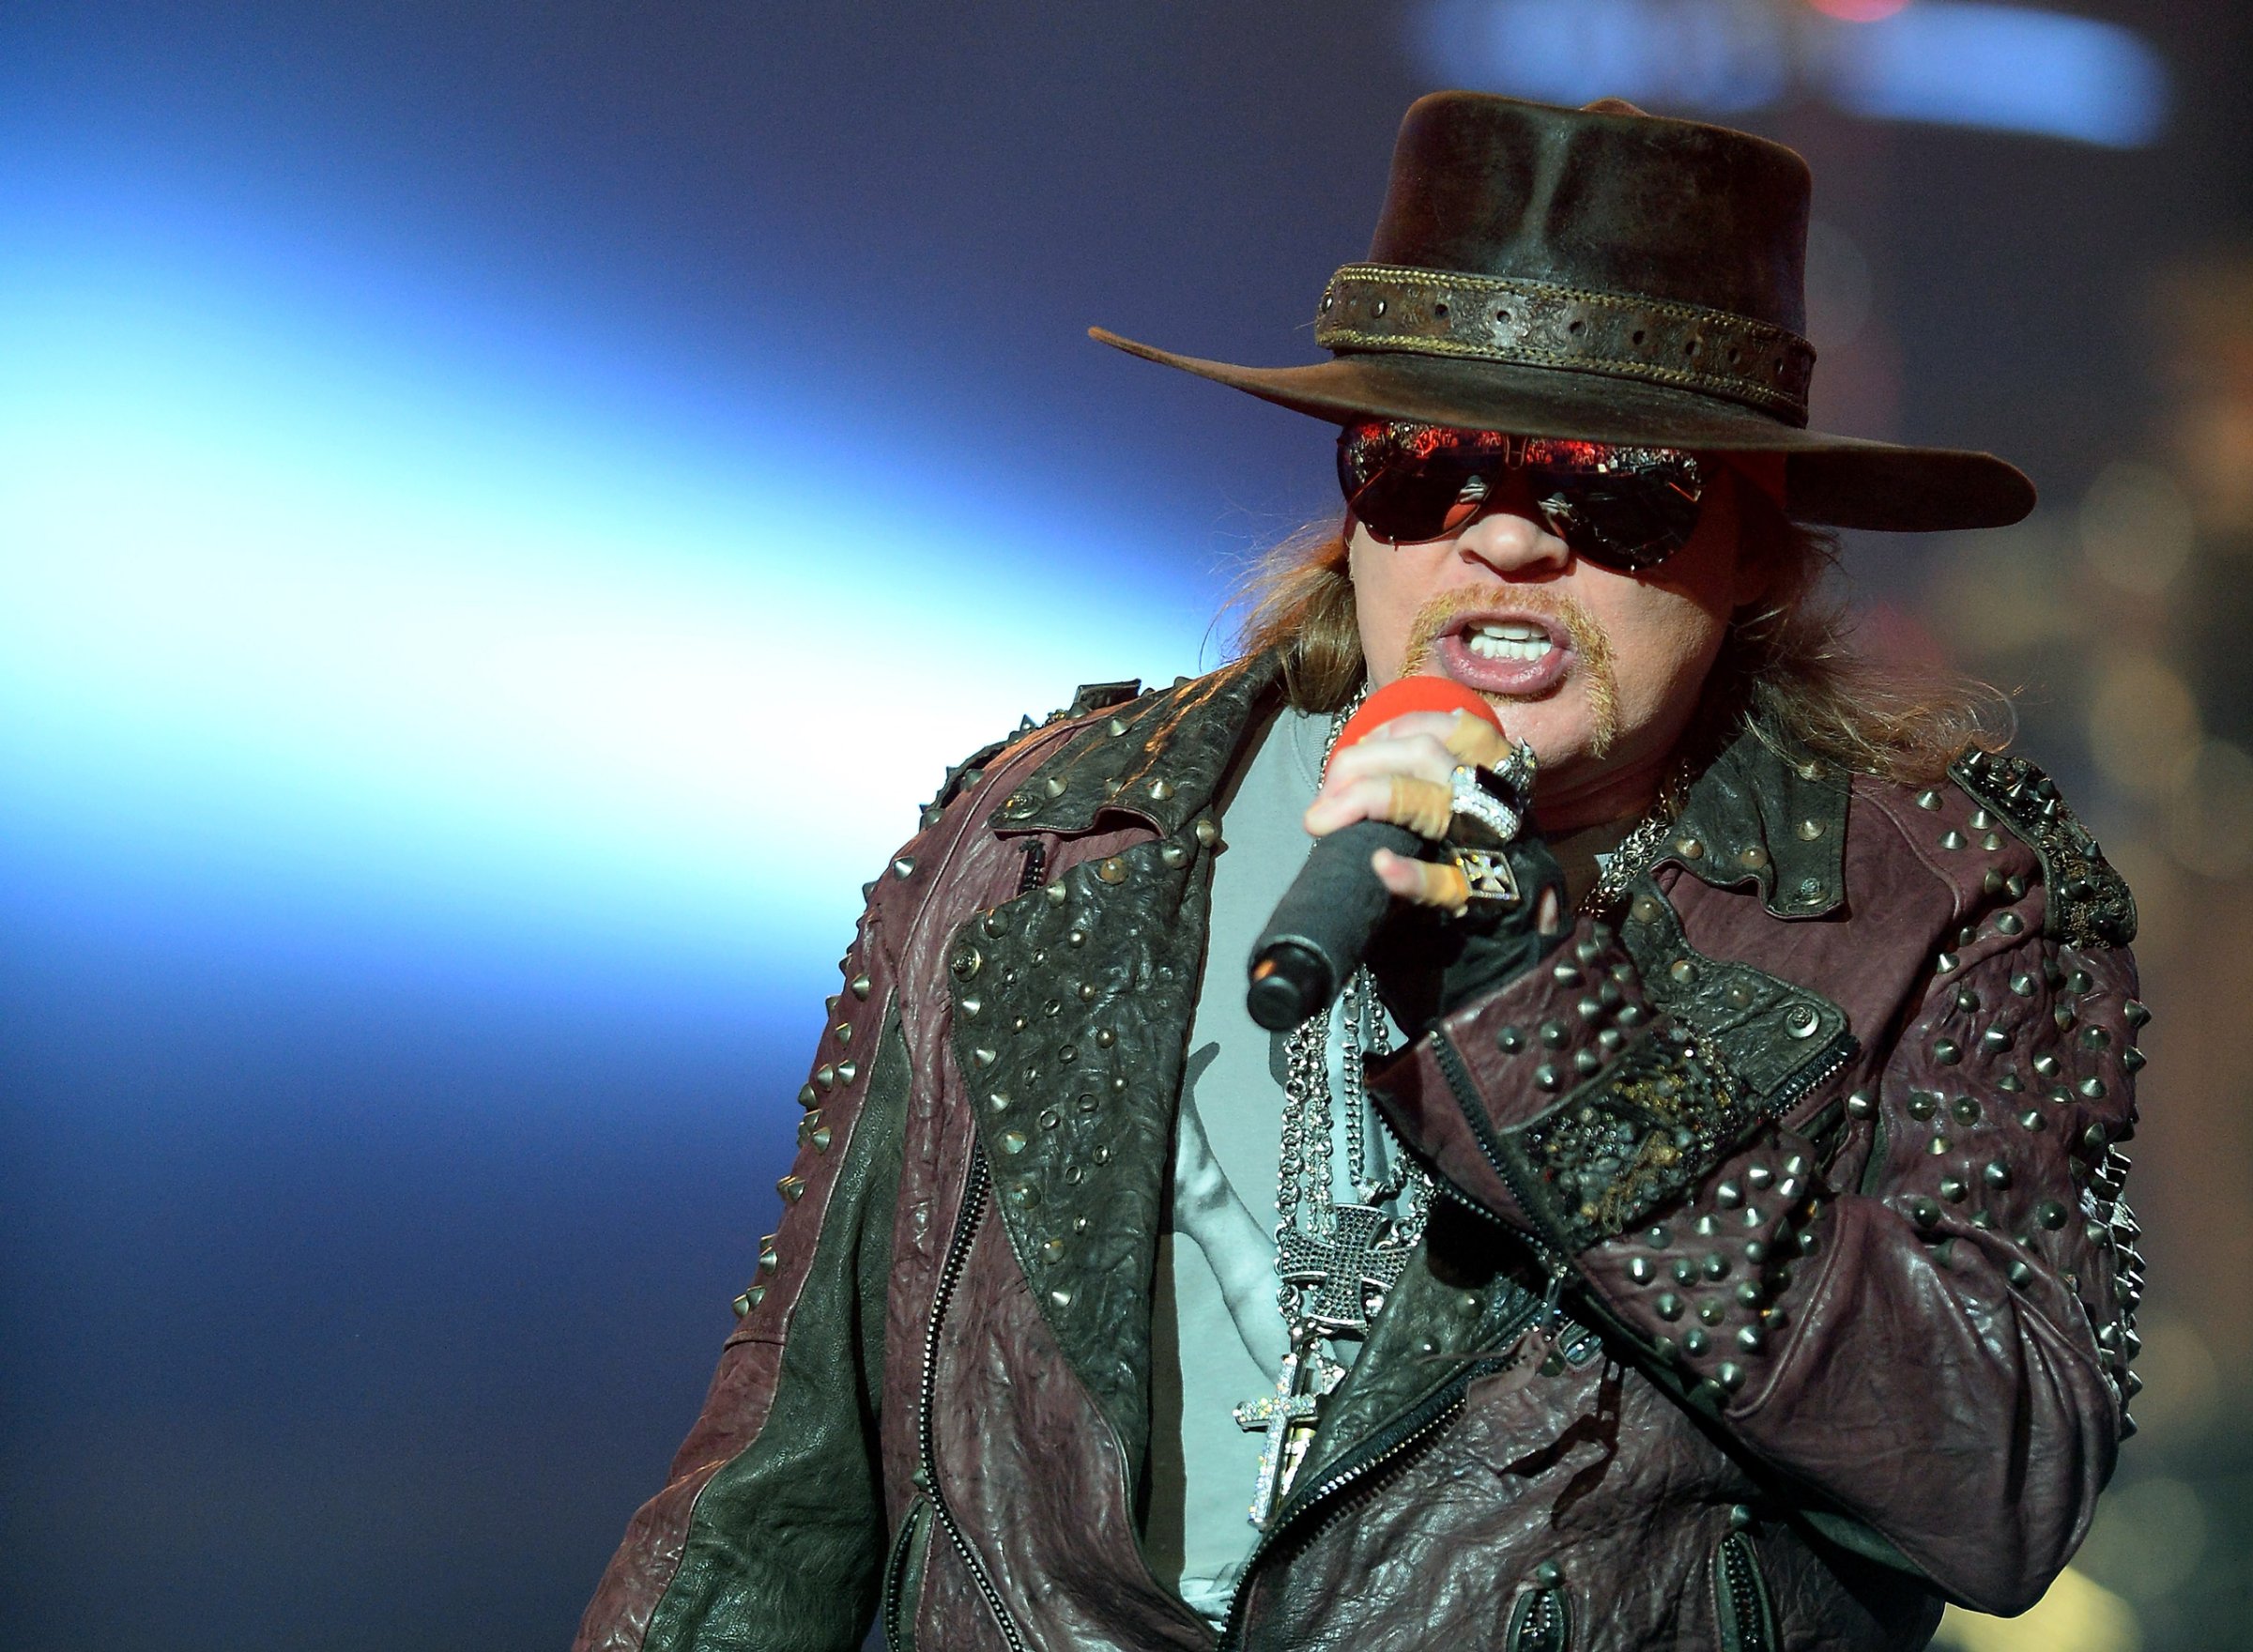 LAS VEGAS, NV - MAY 21: Singer Axl Rose of Guns N' Roses performs at The Joint inside the Hard Rock Hotel &amp; Casino during the opening night of the band's second residency, "Guns N' Roses - An Evening of Destruction. No Trickery!" on May 21, 2014 in Las Vegas, Nevada. (Photo by Ethan Miller/Getty Images)